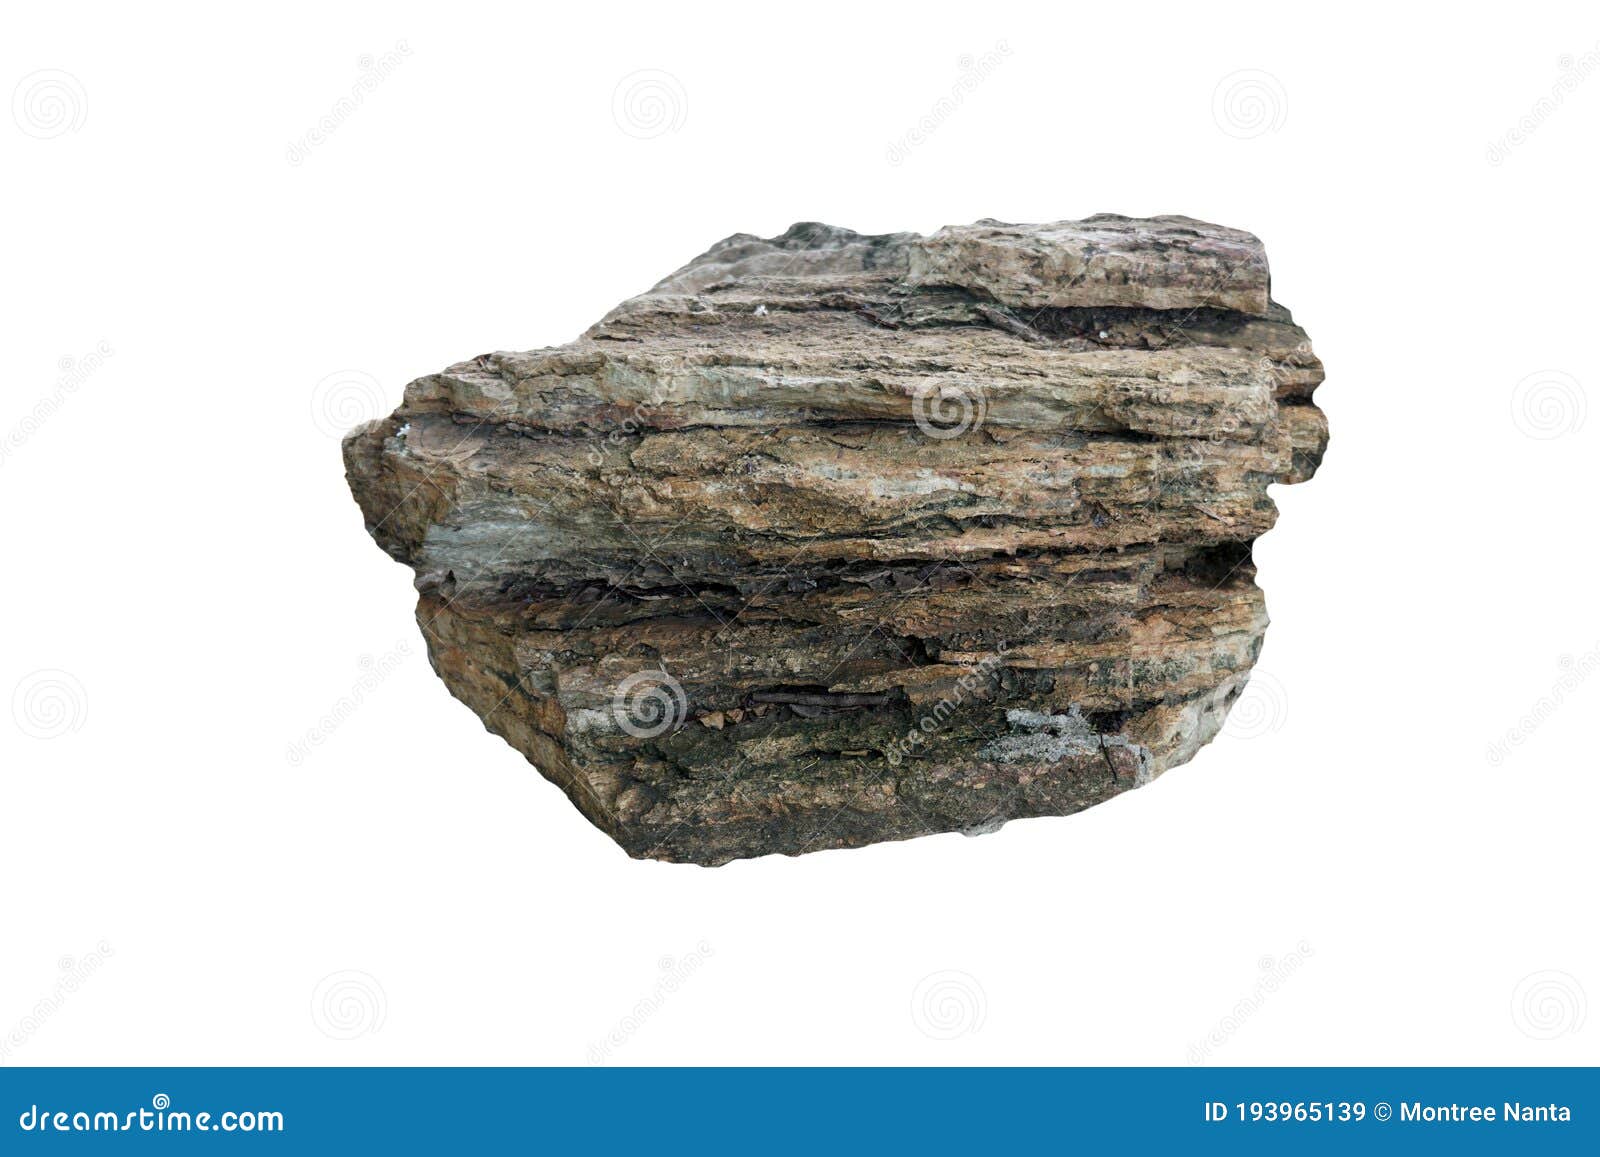 Schist And Gneiss Rock Isolated On A White Background. Metamorphic Rock ...